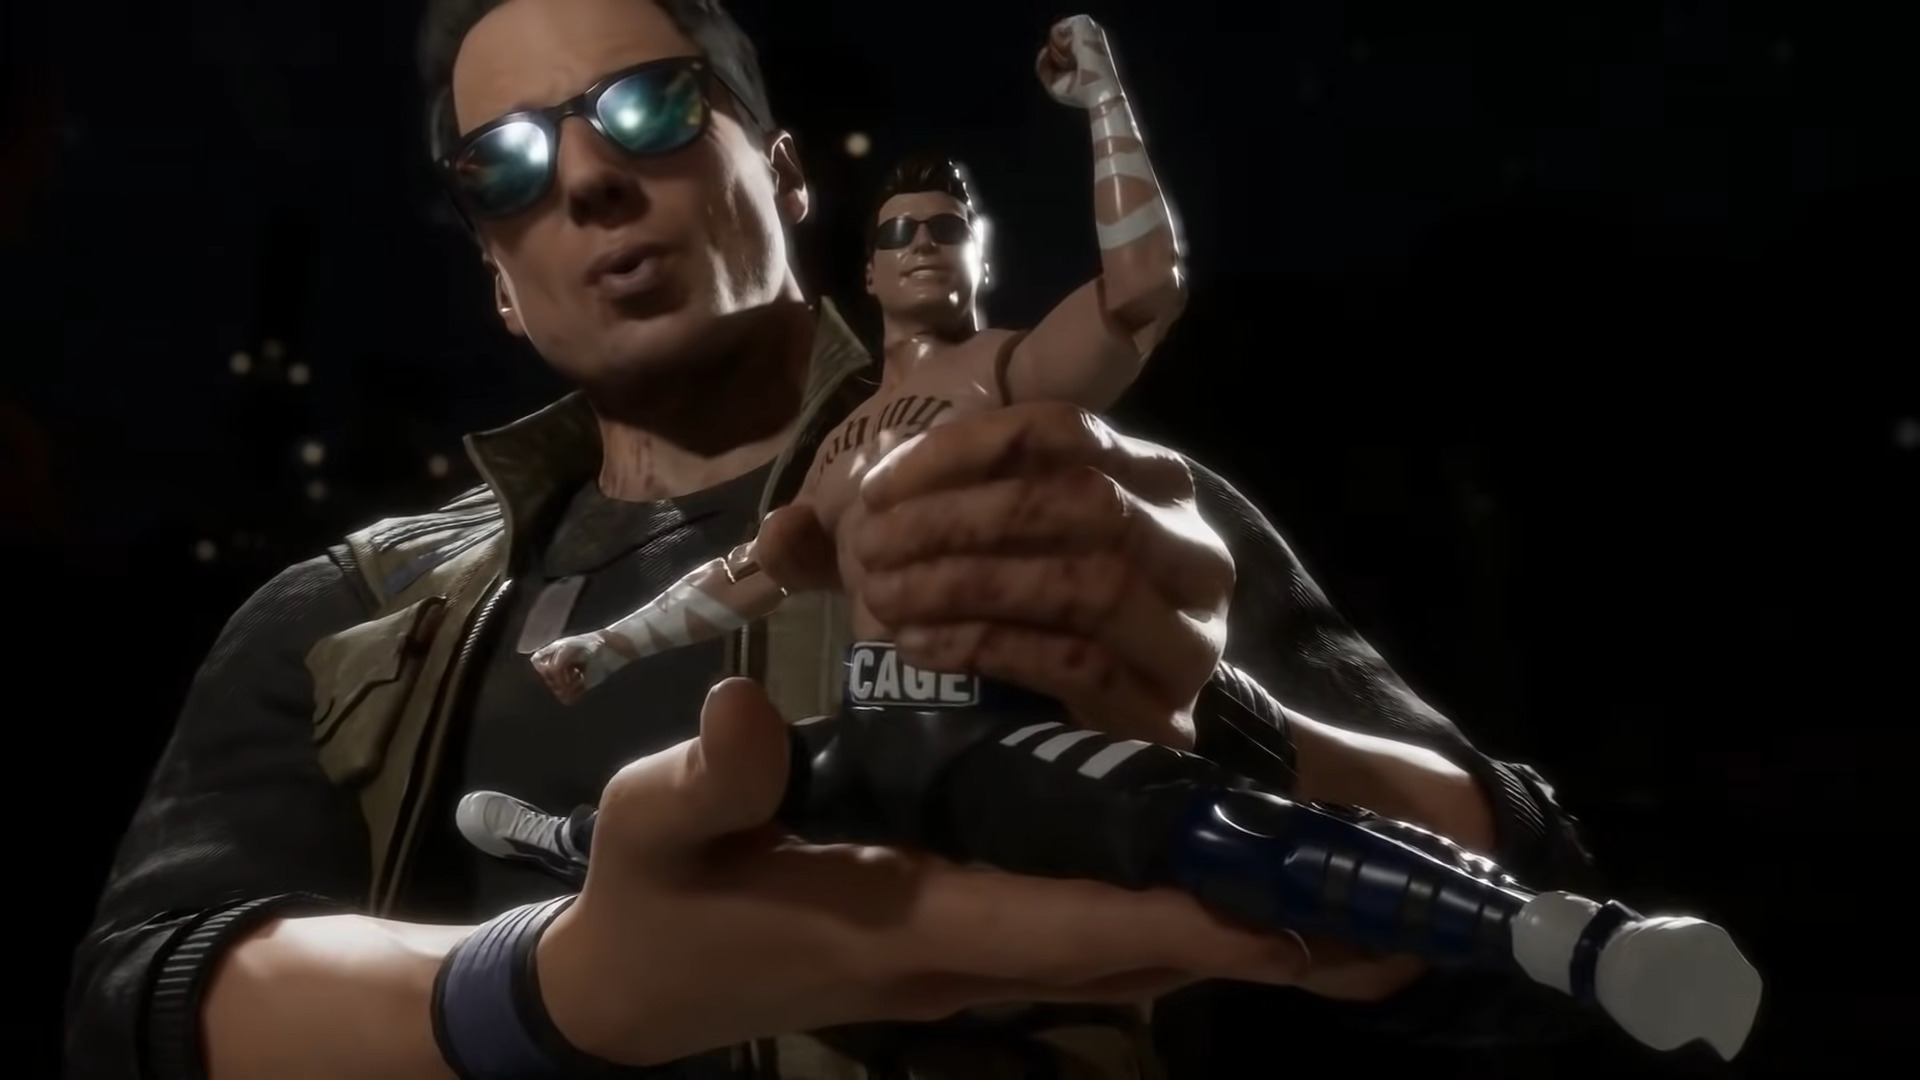 Johnny Cage (Andrew Bowen) shows off his own action figure in Mortal Kombat 11 (2019), NetherRealm Studios